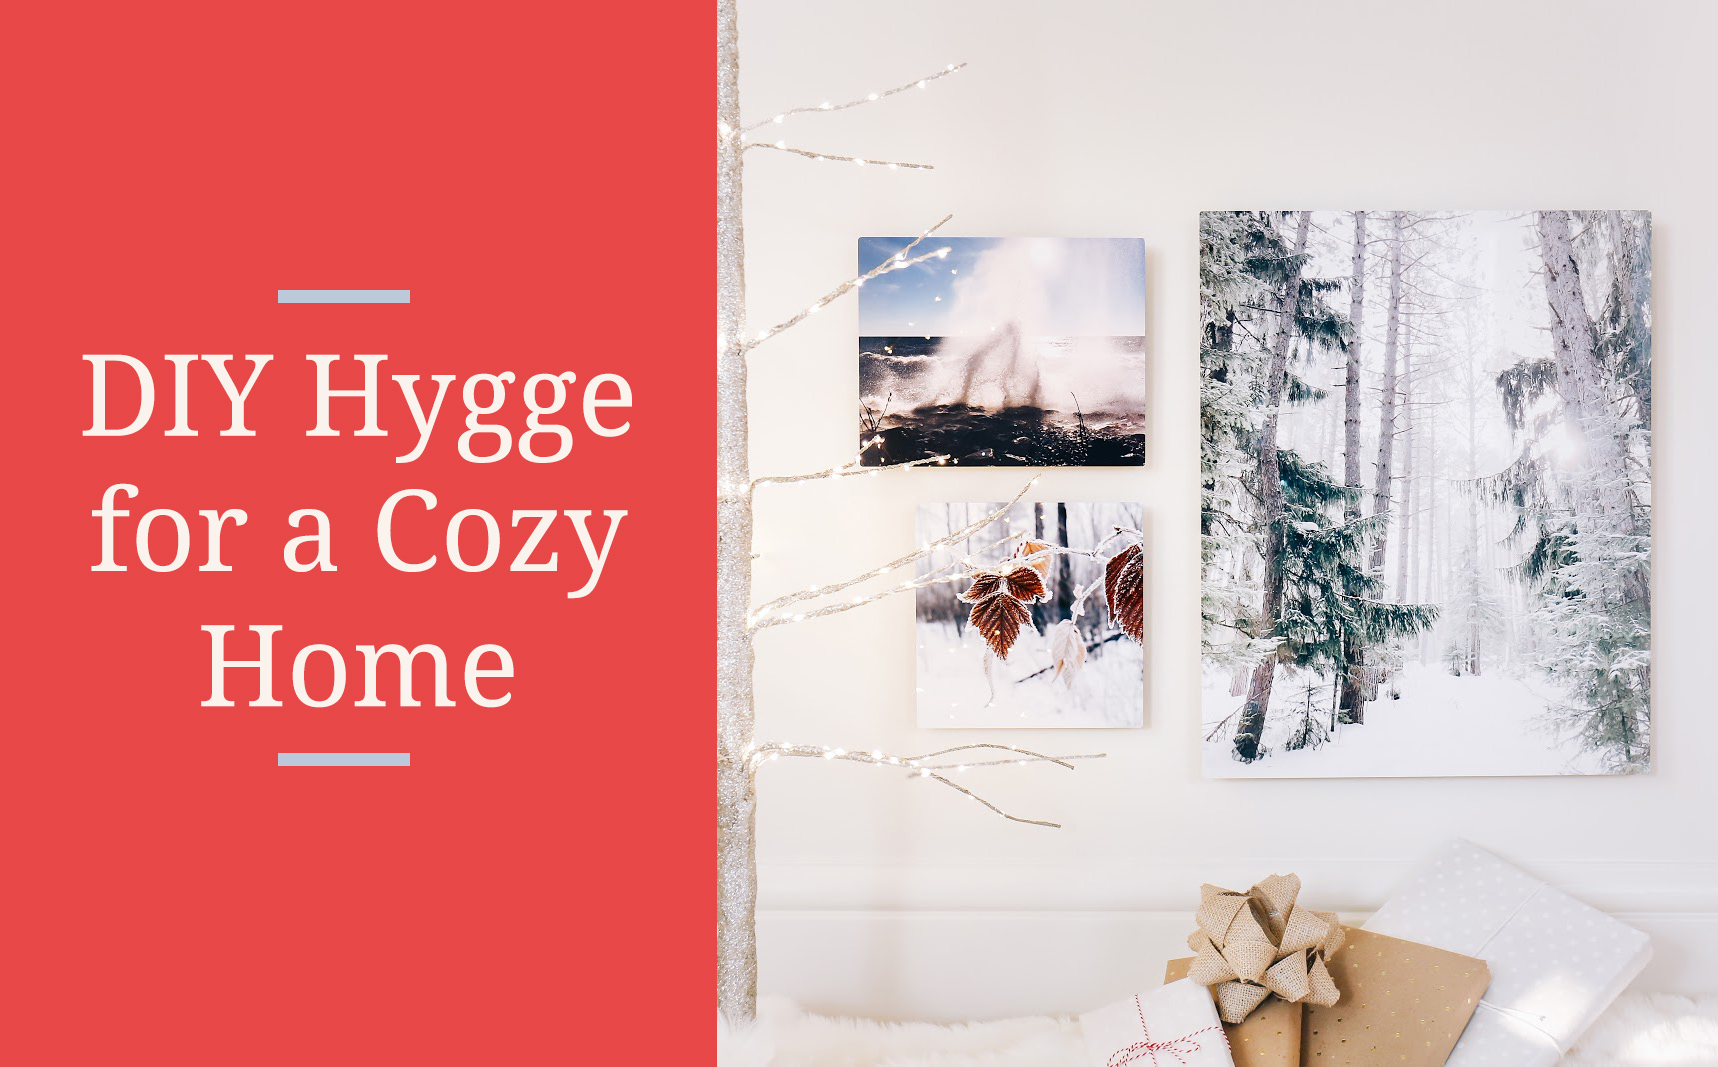 DIY Hygge for a Cozy Home